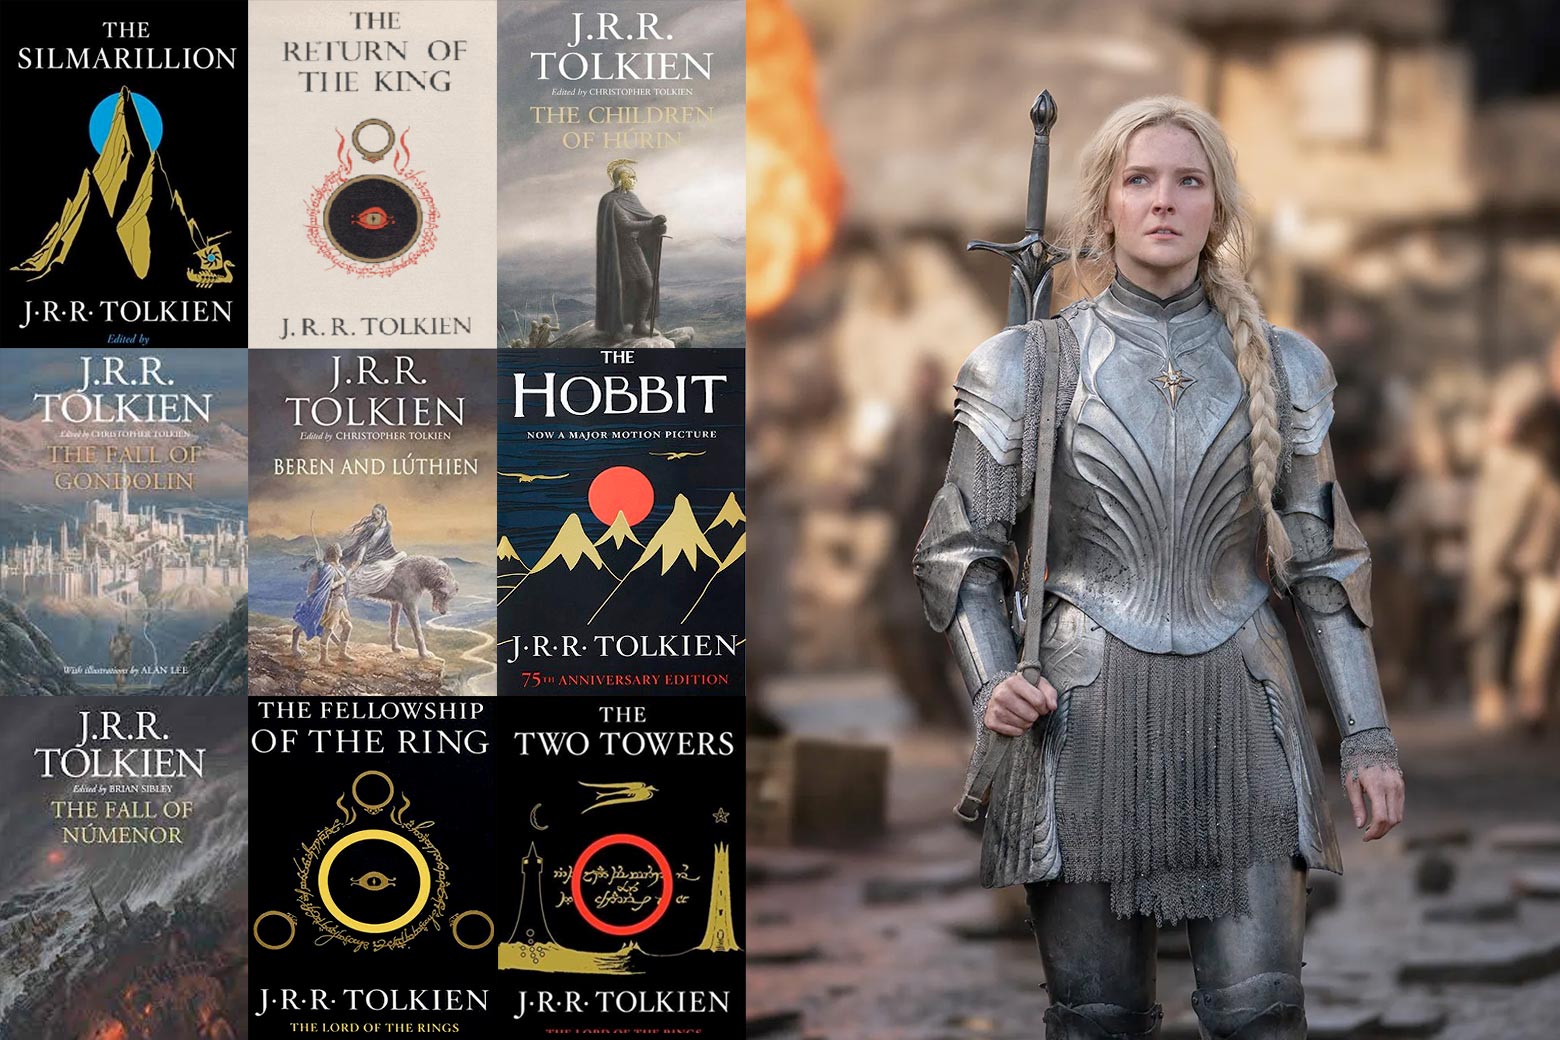 Spanje Gehuurd worst Lord of the Rings: Don't read Tolkien's books before The Rings of Power.